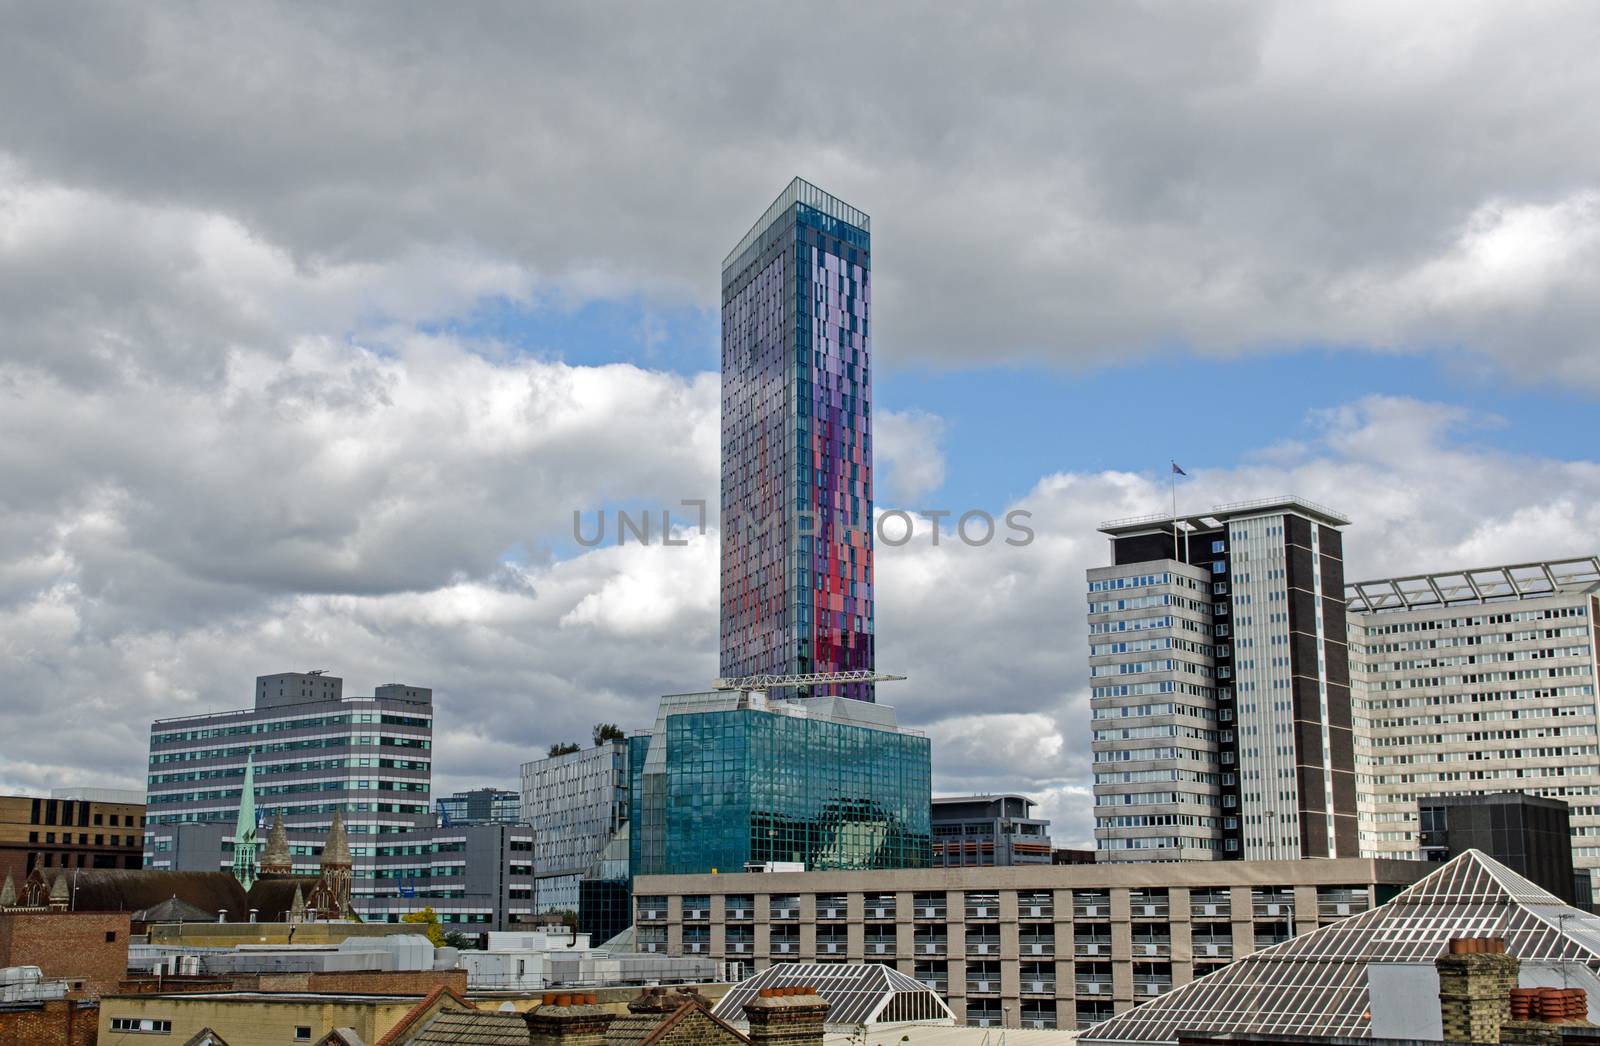 The landmark Saffron Tower with distinctive purple and red cladding in the middle of Croydon, South London.